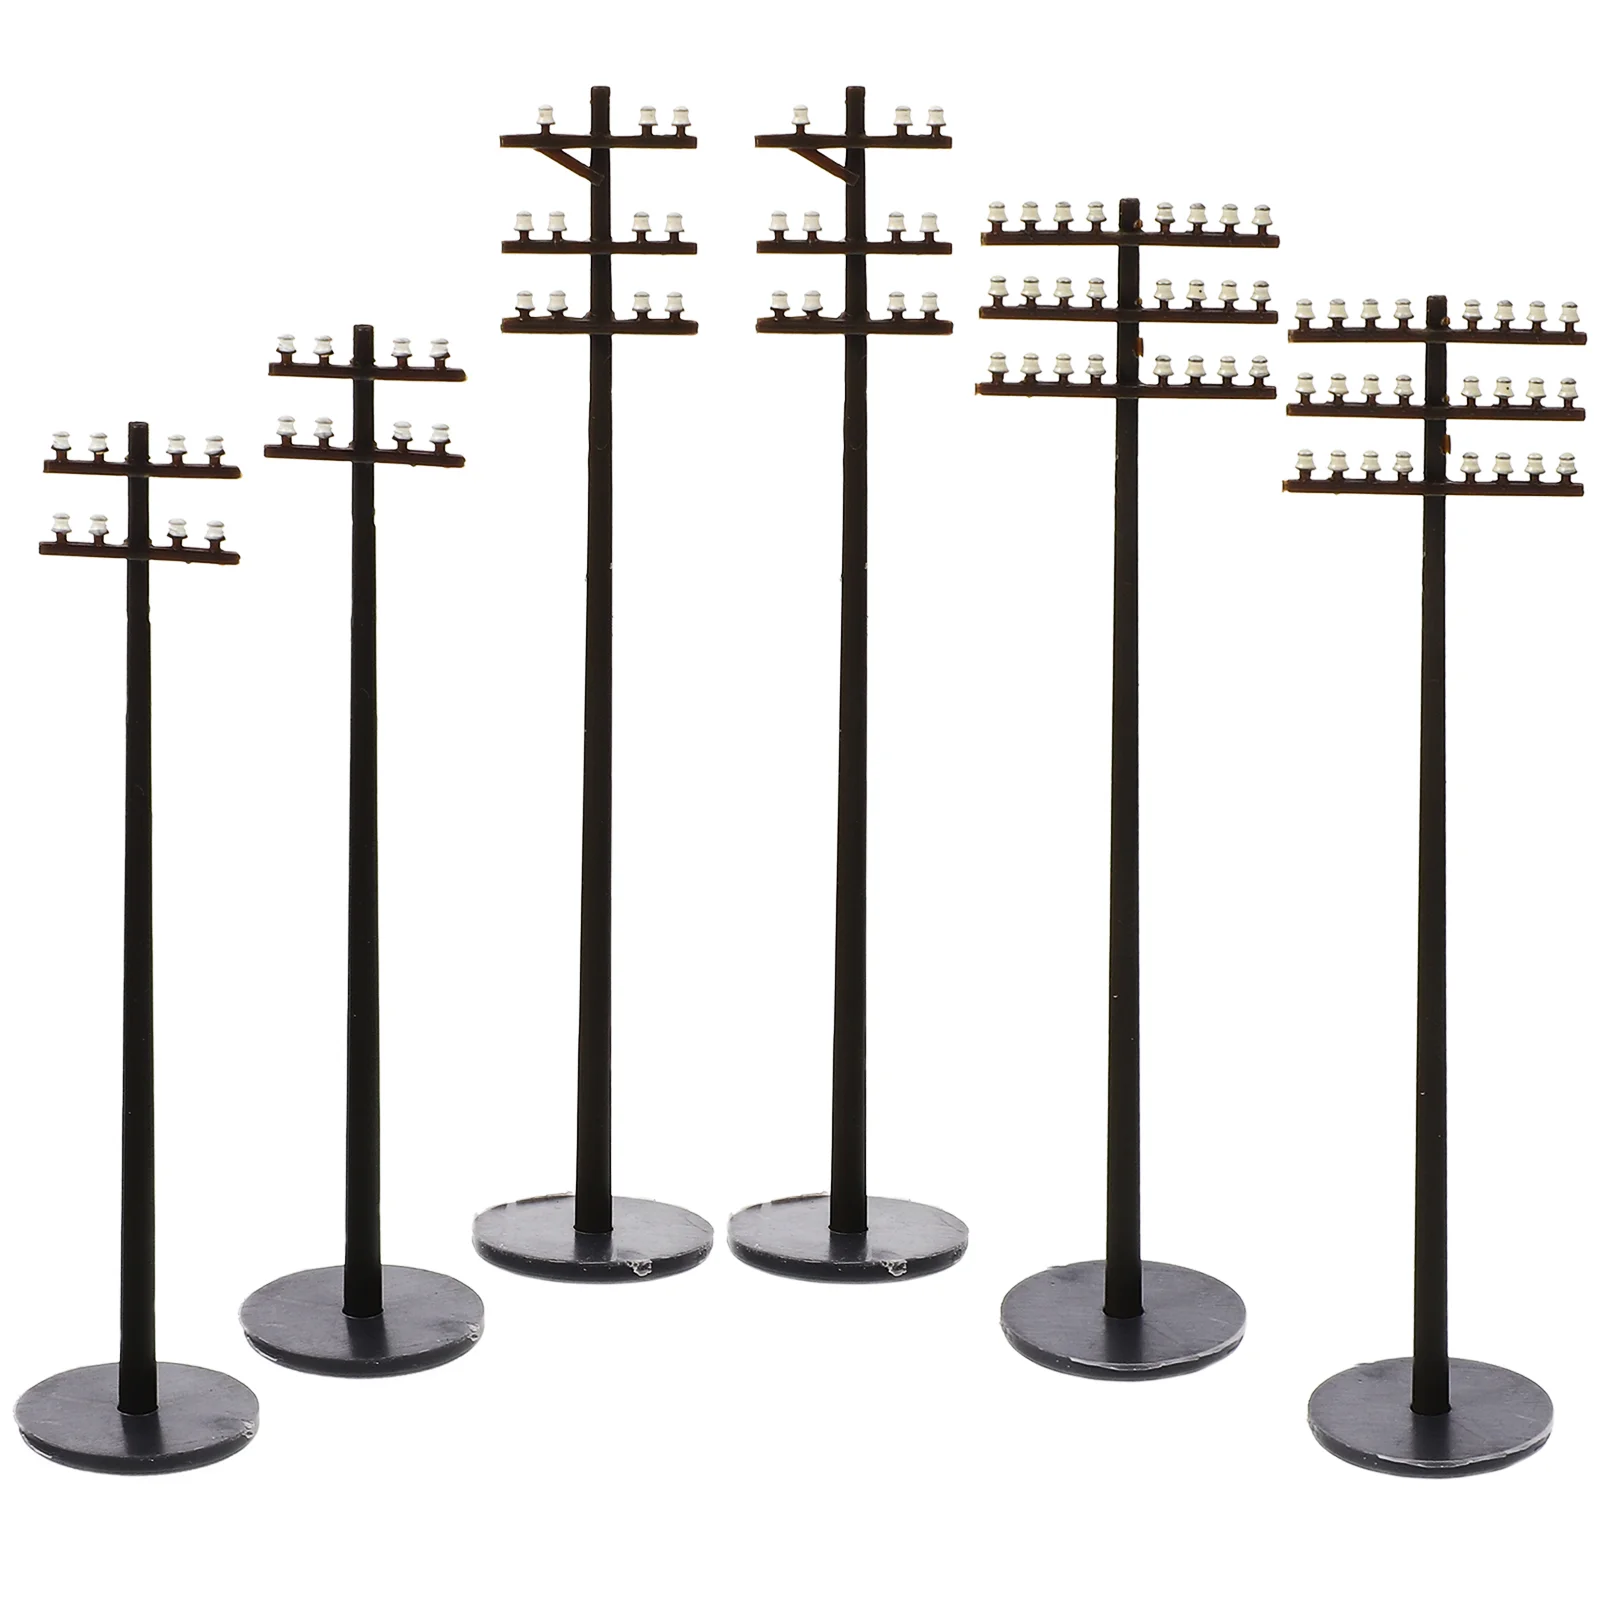 

6 Pcs Micro Landscape Garden DIY Supply Telegraph Poles Miniatures Material Train Layout Models Abs Sand Table Child Toys Kids